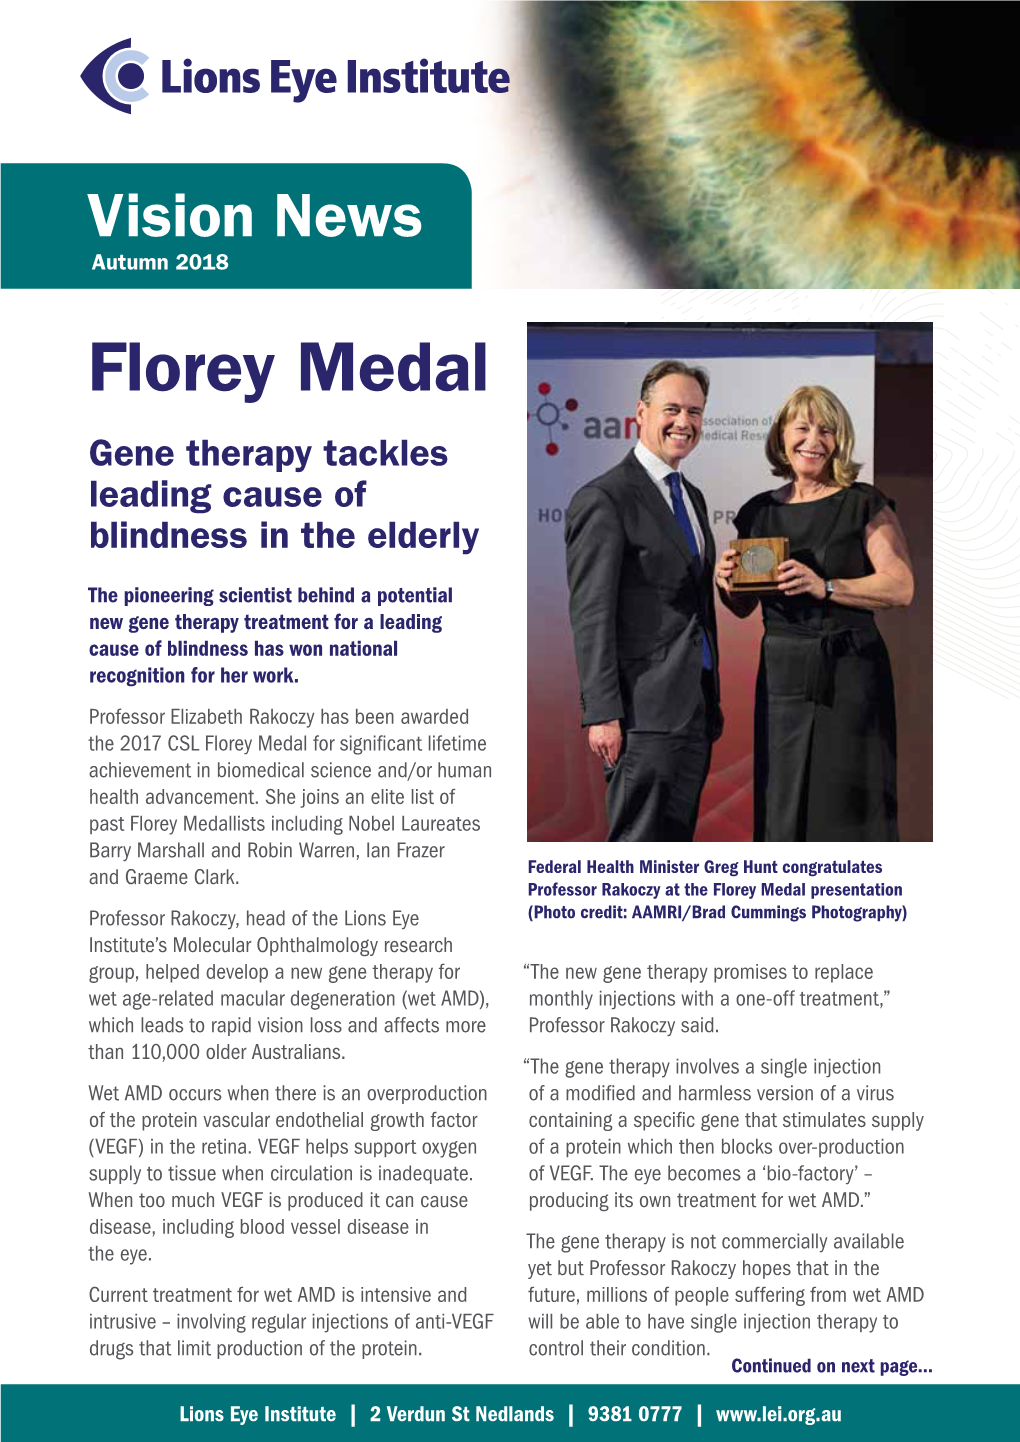 Florey Medal Gene Therapy Tackles Leading Cause of Blindness in the Elderly